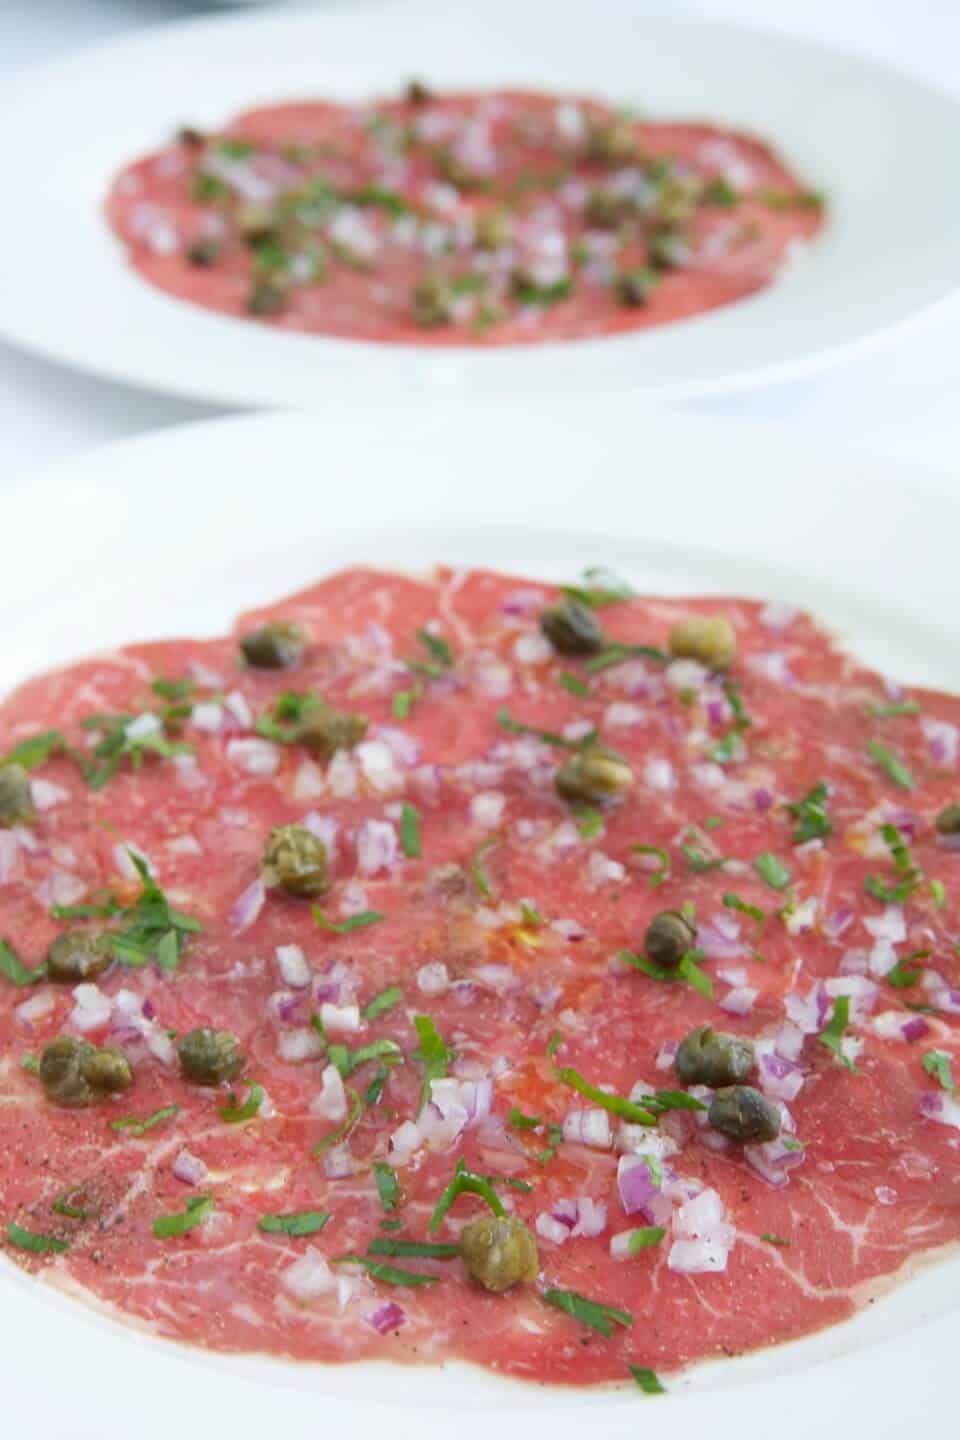 Beef Carpaccio Recipe with Capers, Parsley and Truffle Oil